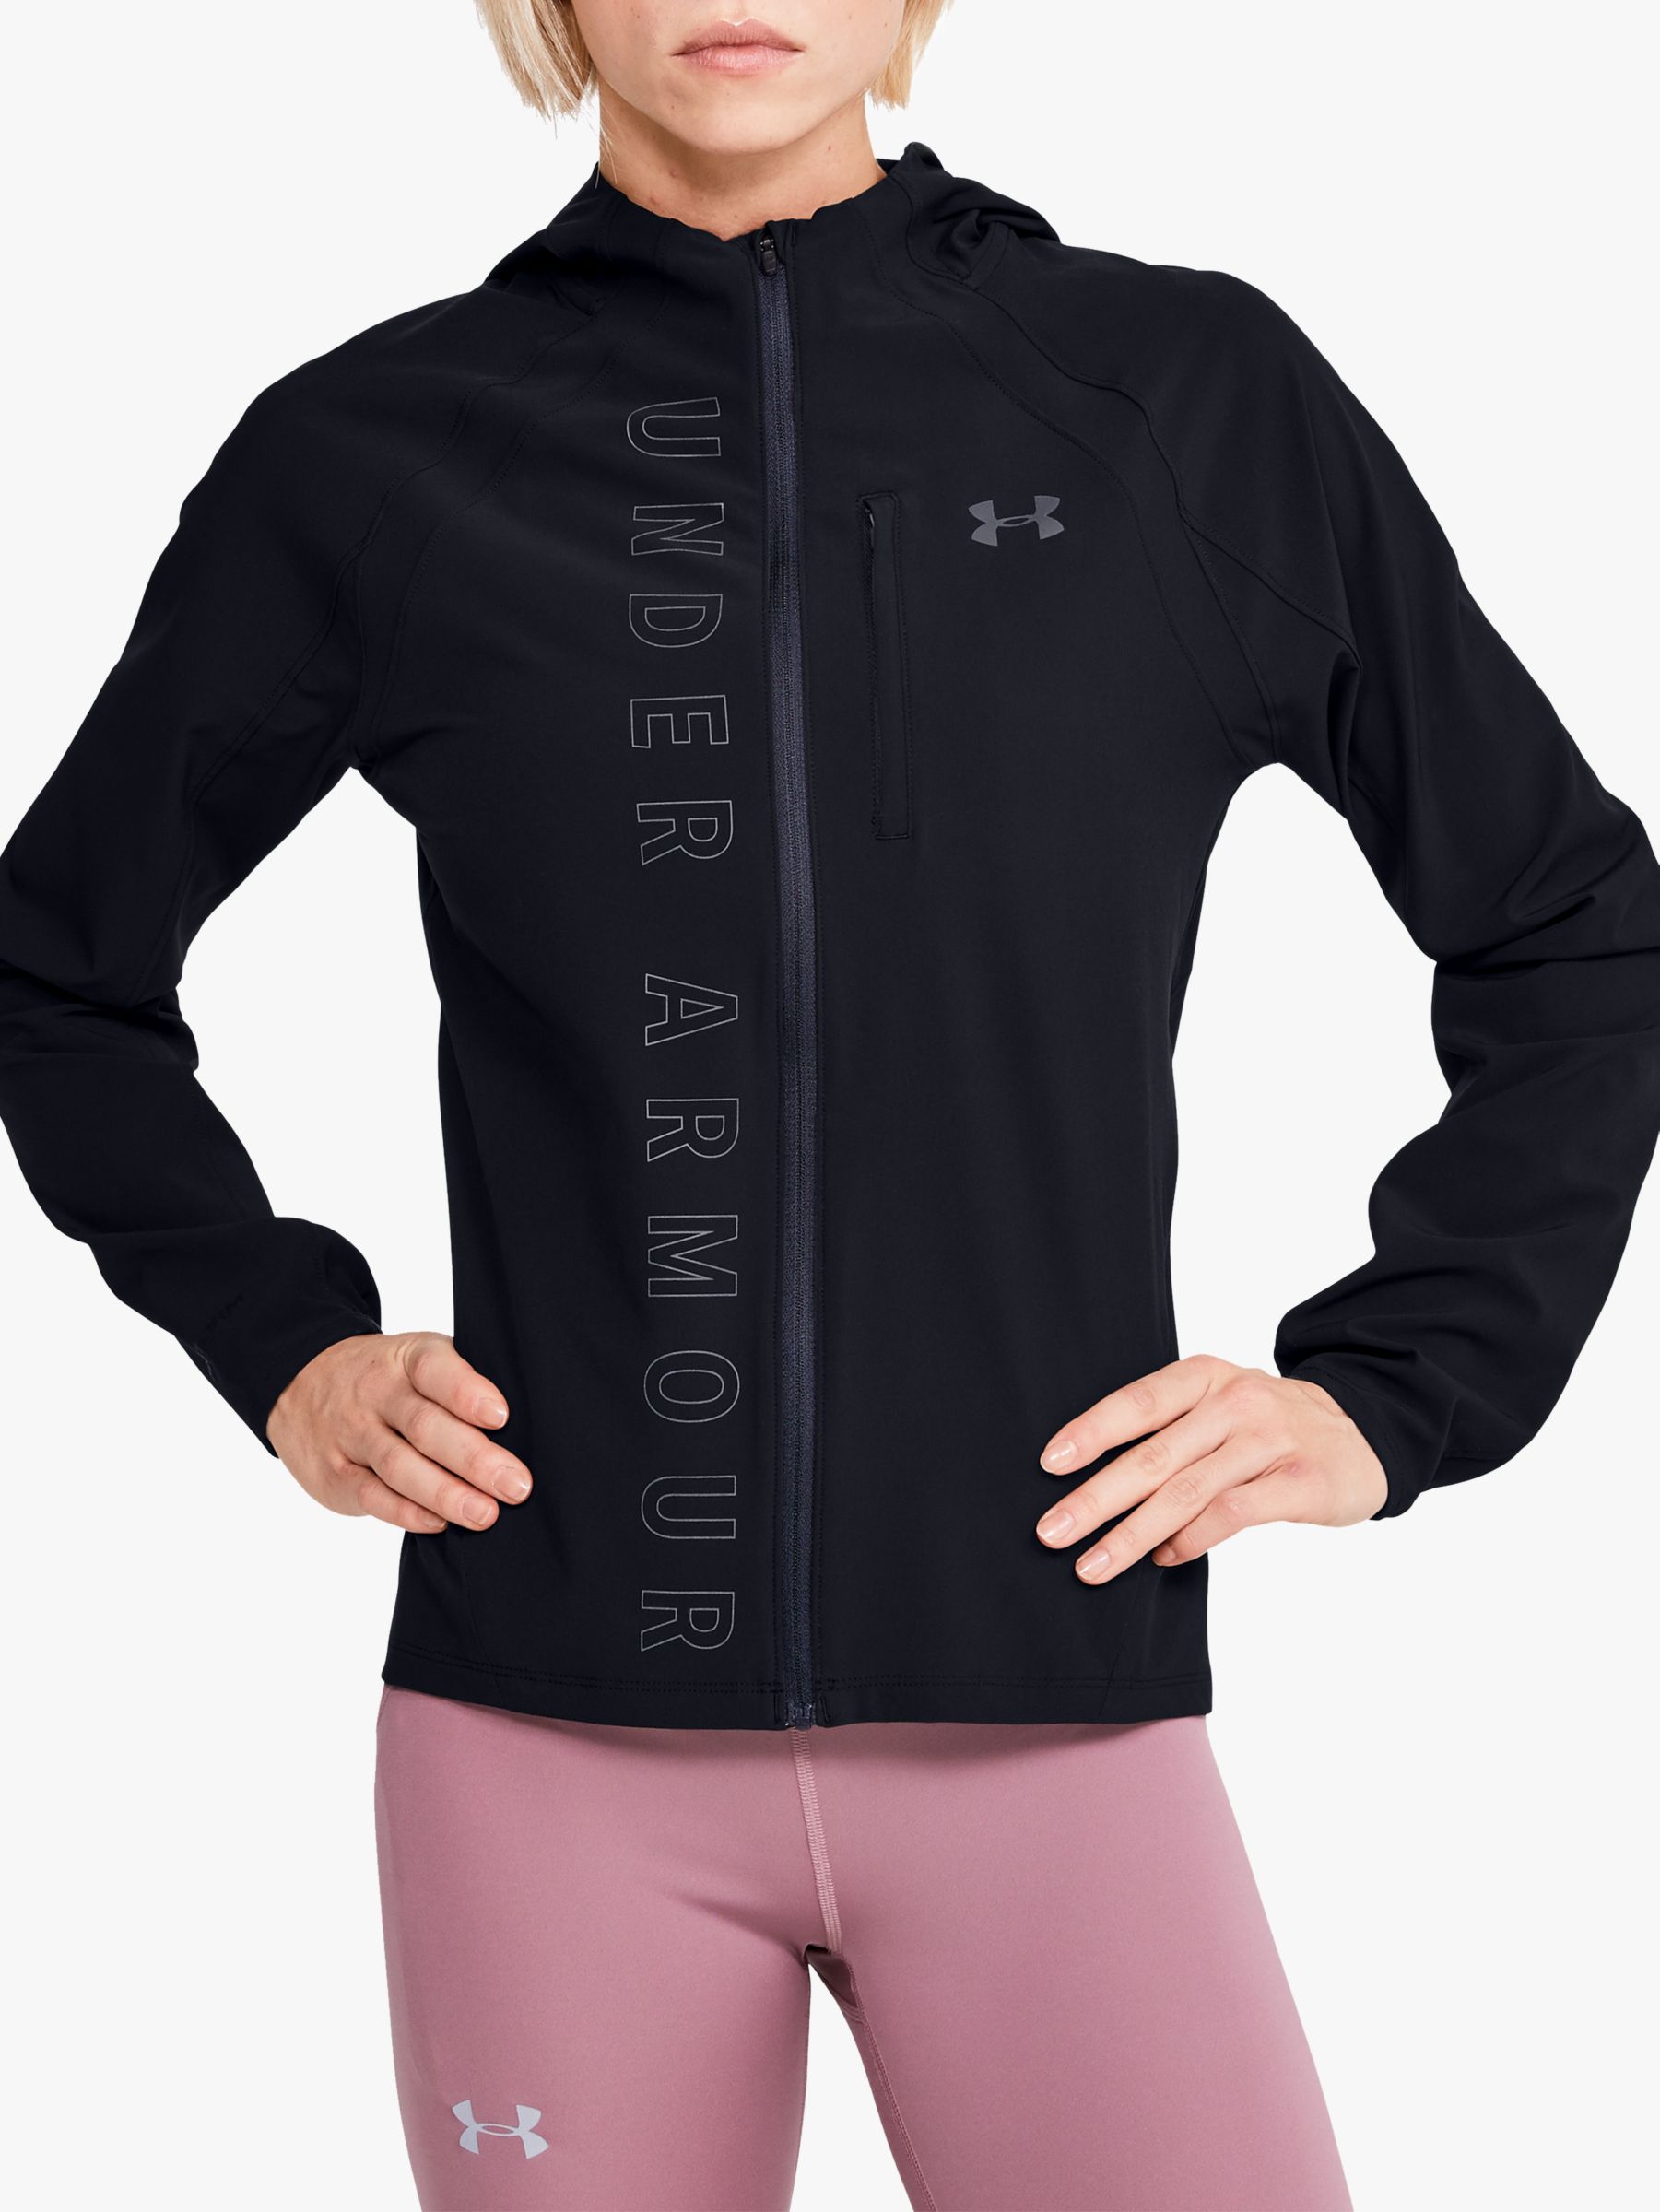 Under Armour Qualifier Outrun The Storm Women's Running Jacket, Black ...